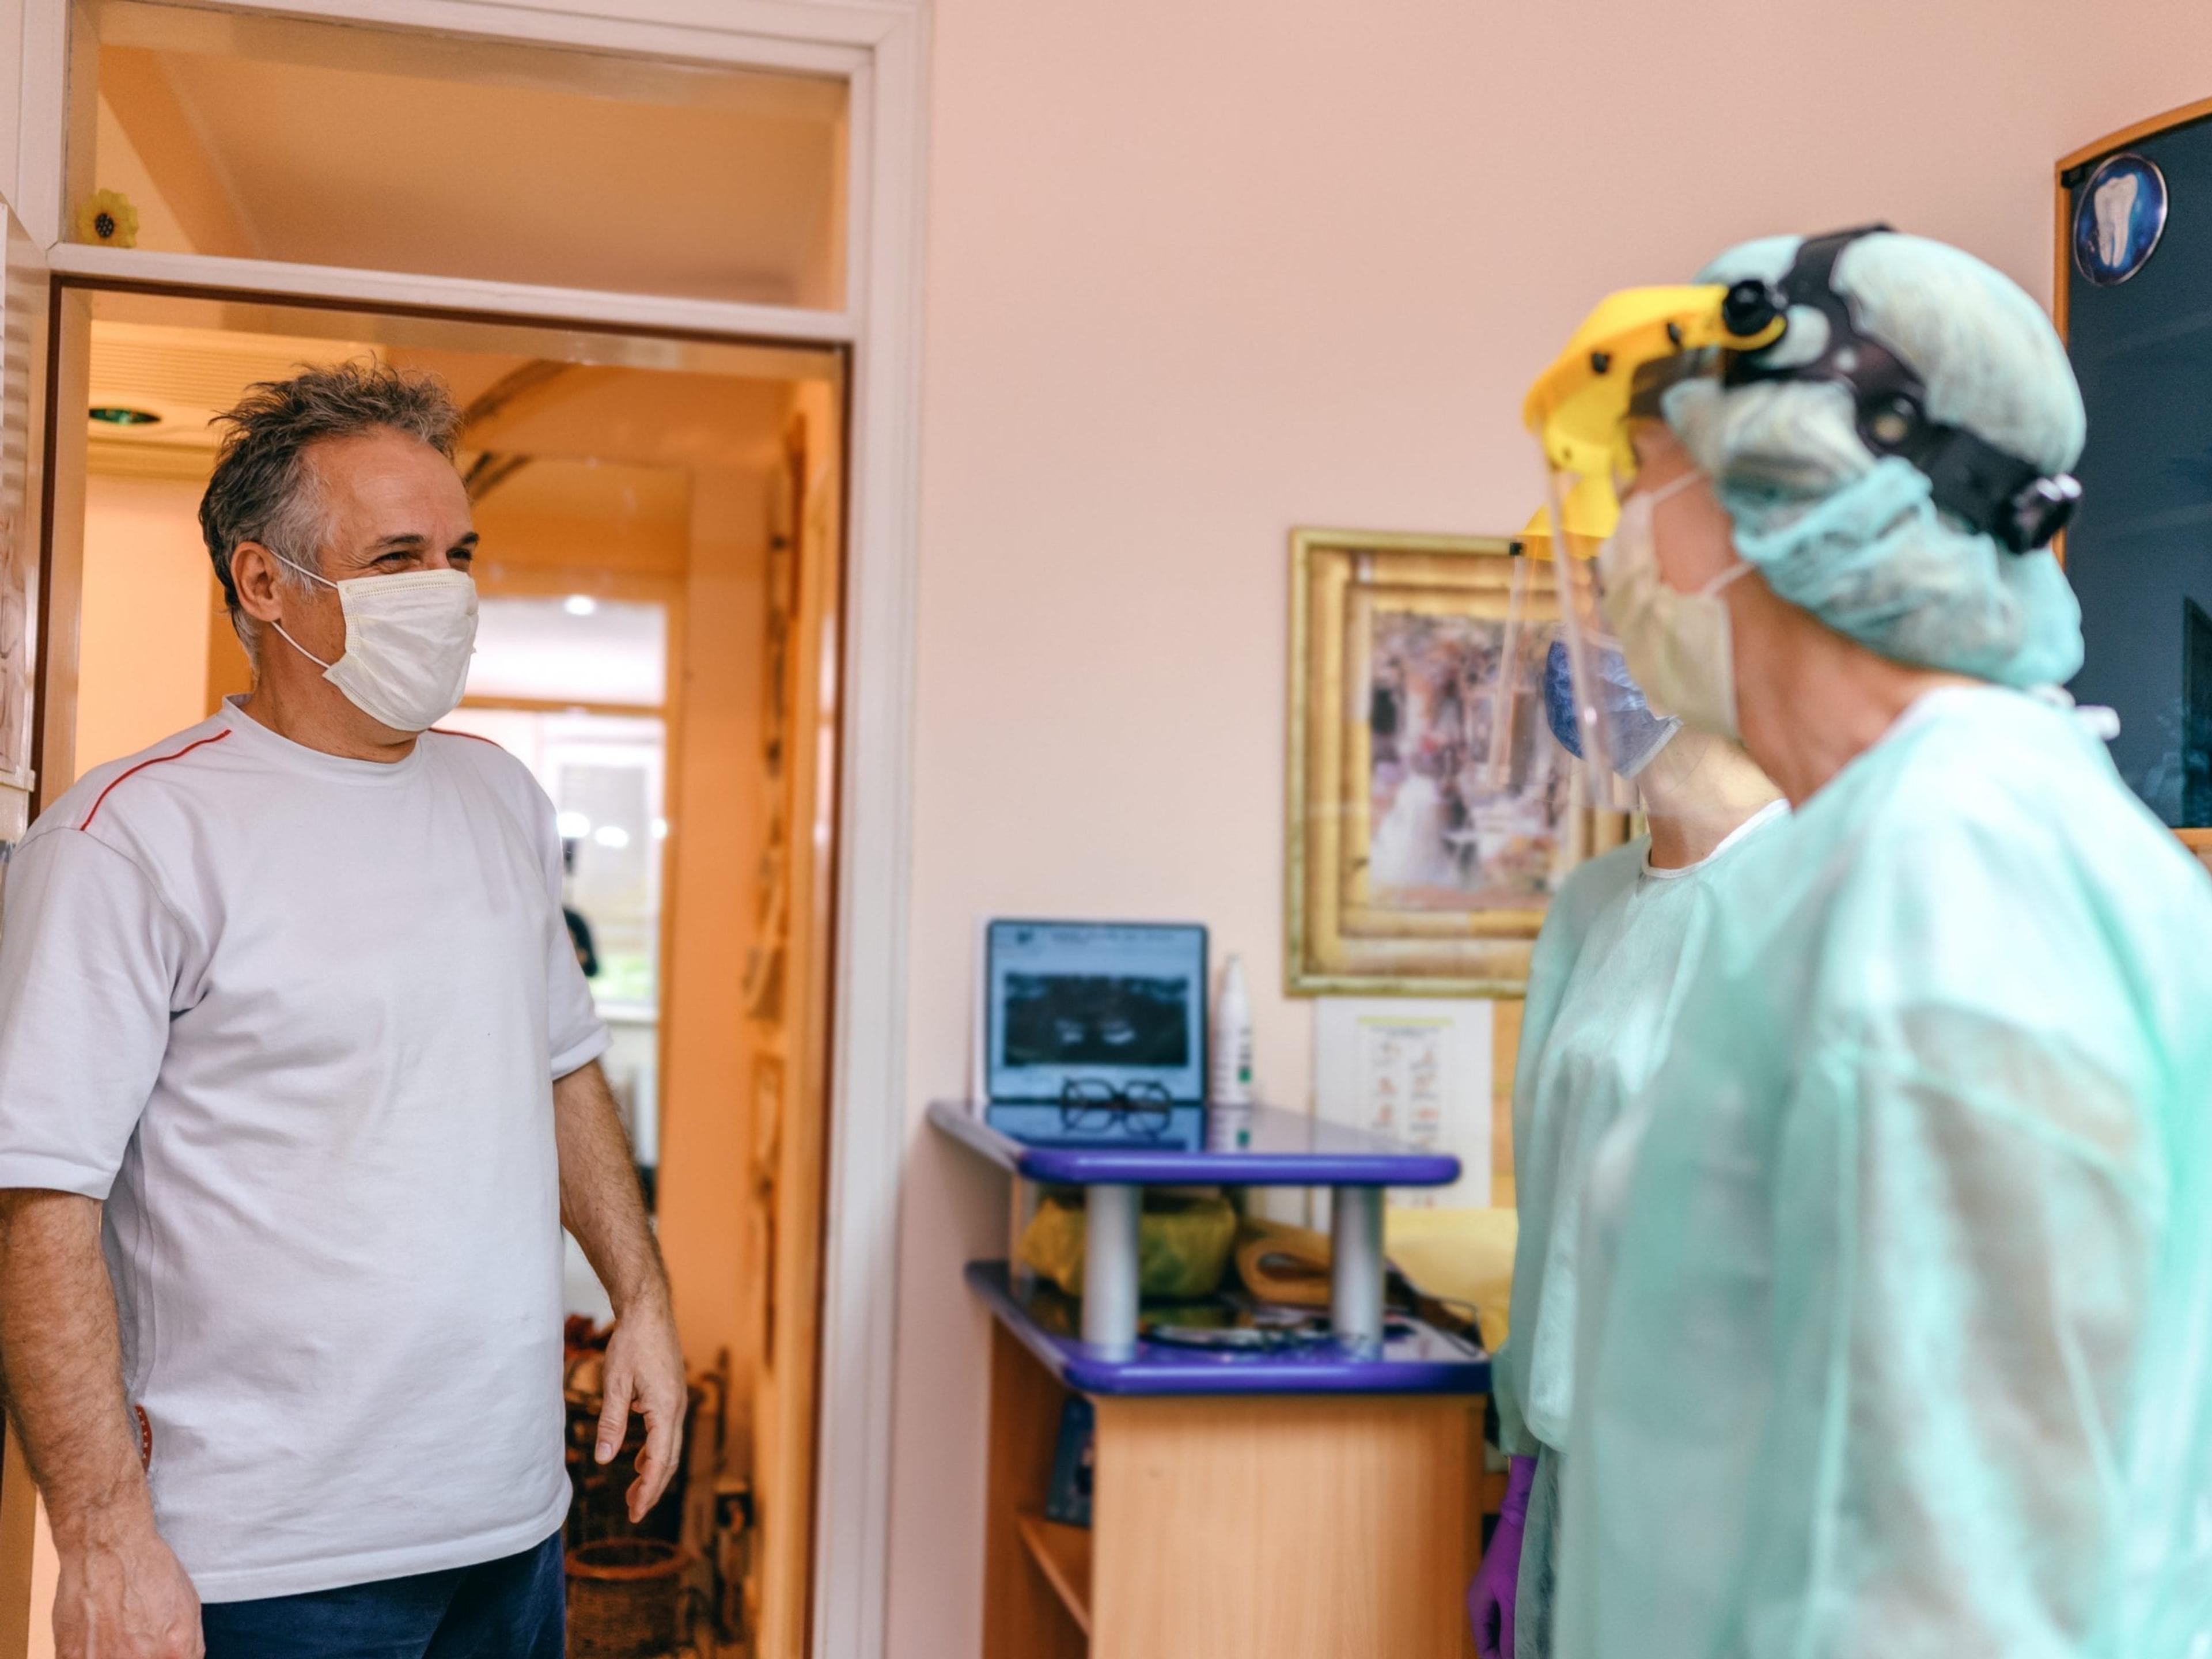 Man wearing a mask at the dentist's office